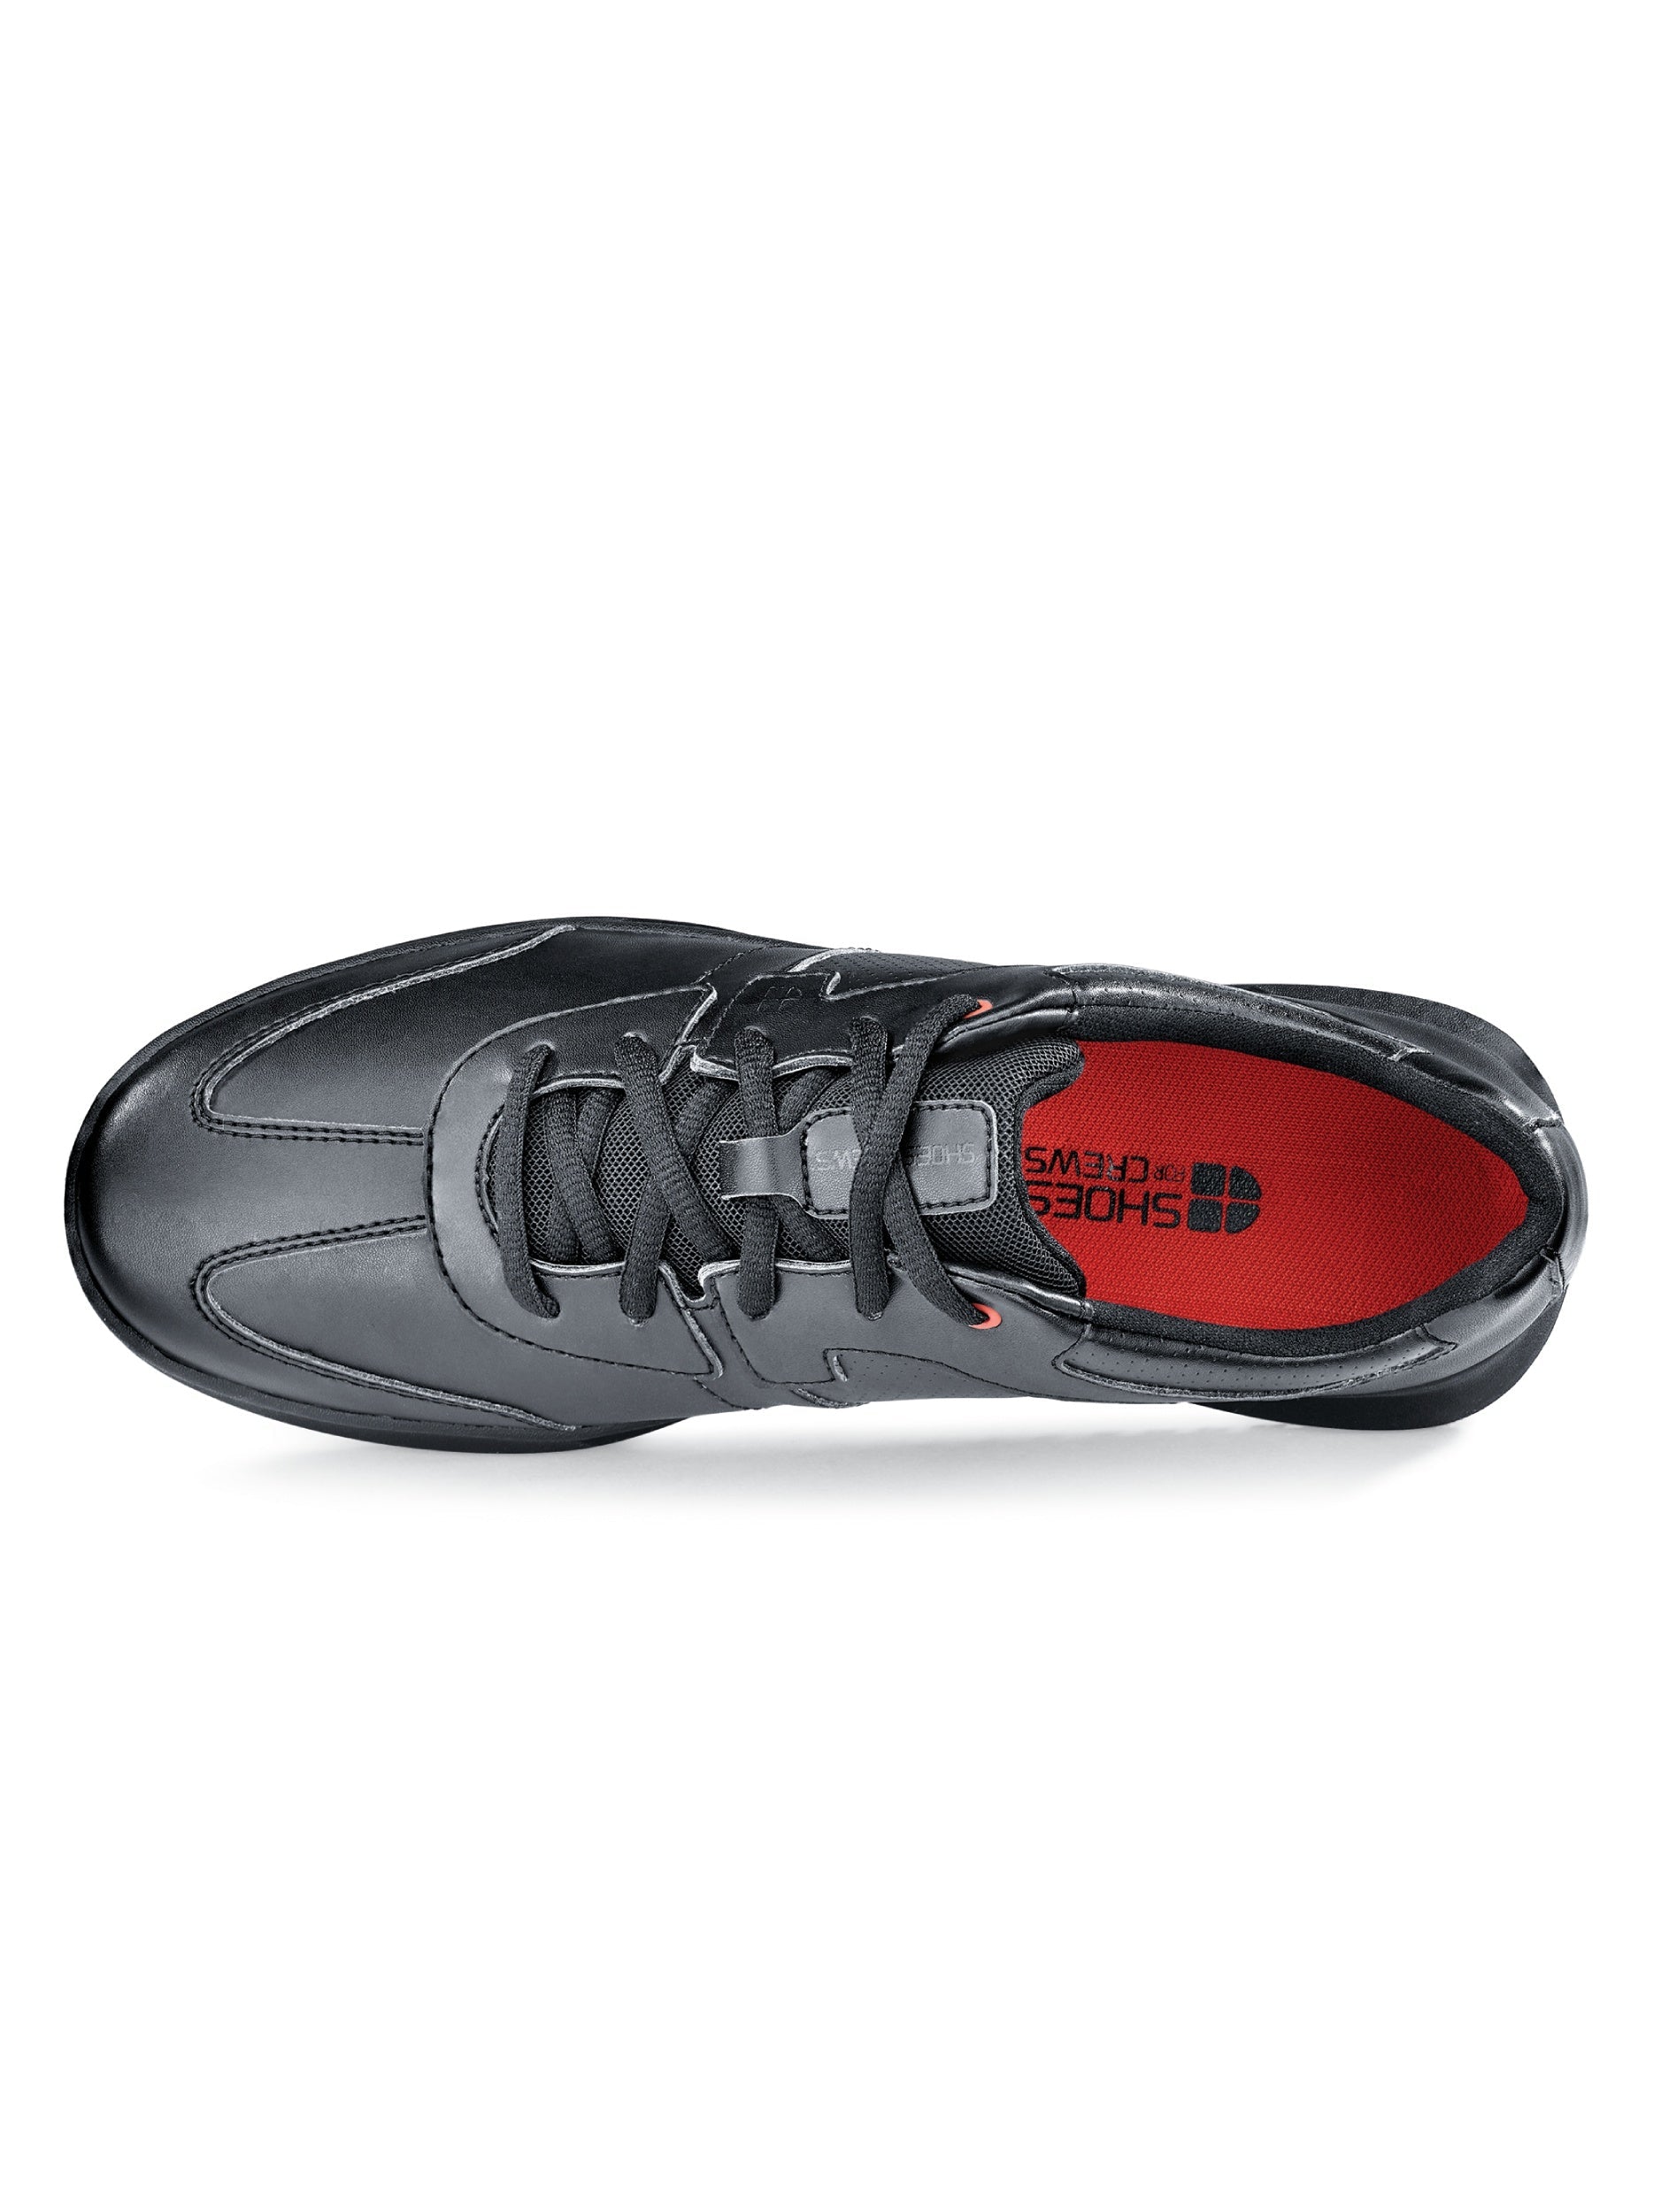 Men's Work Shoe Freestyle Ii Black by  Shoes For Crews.